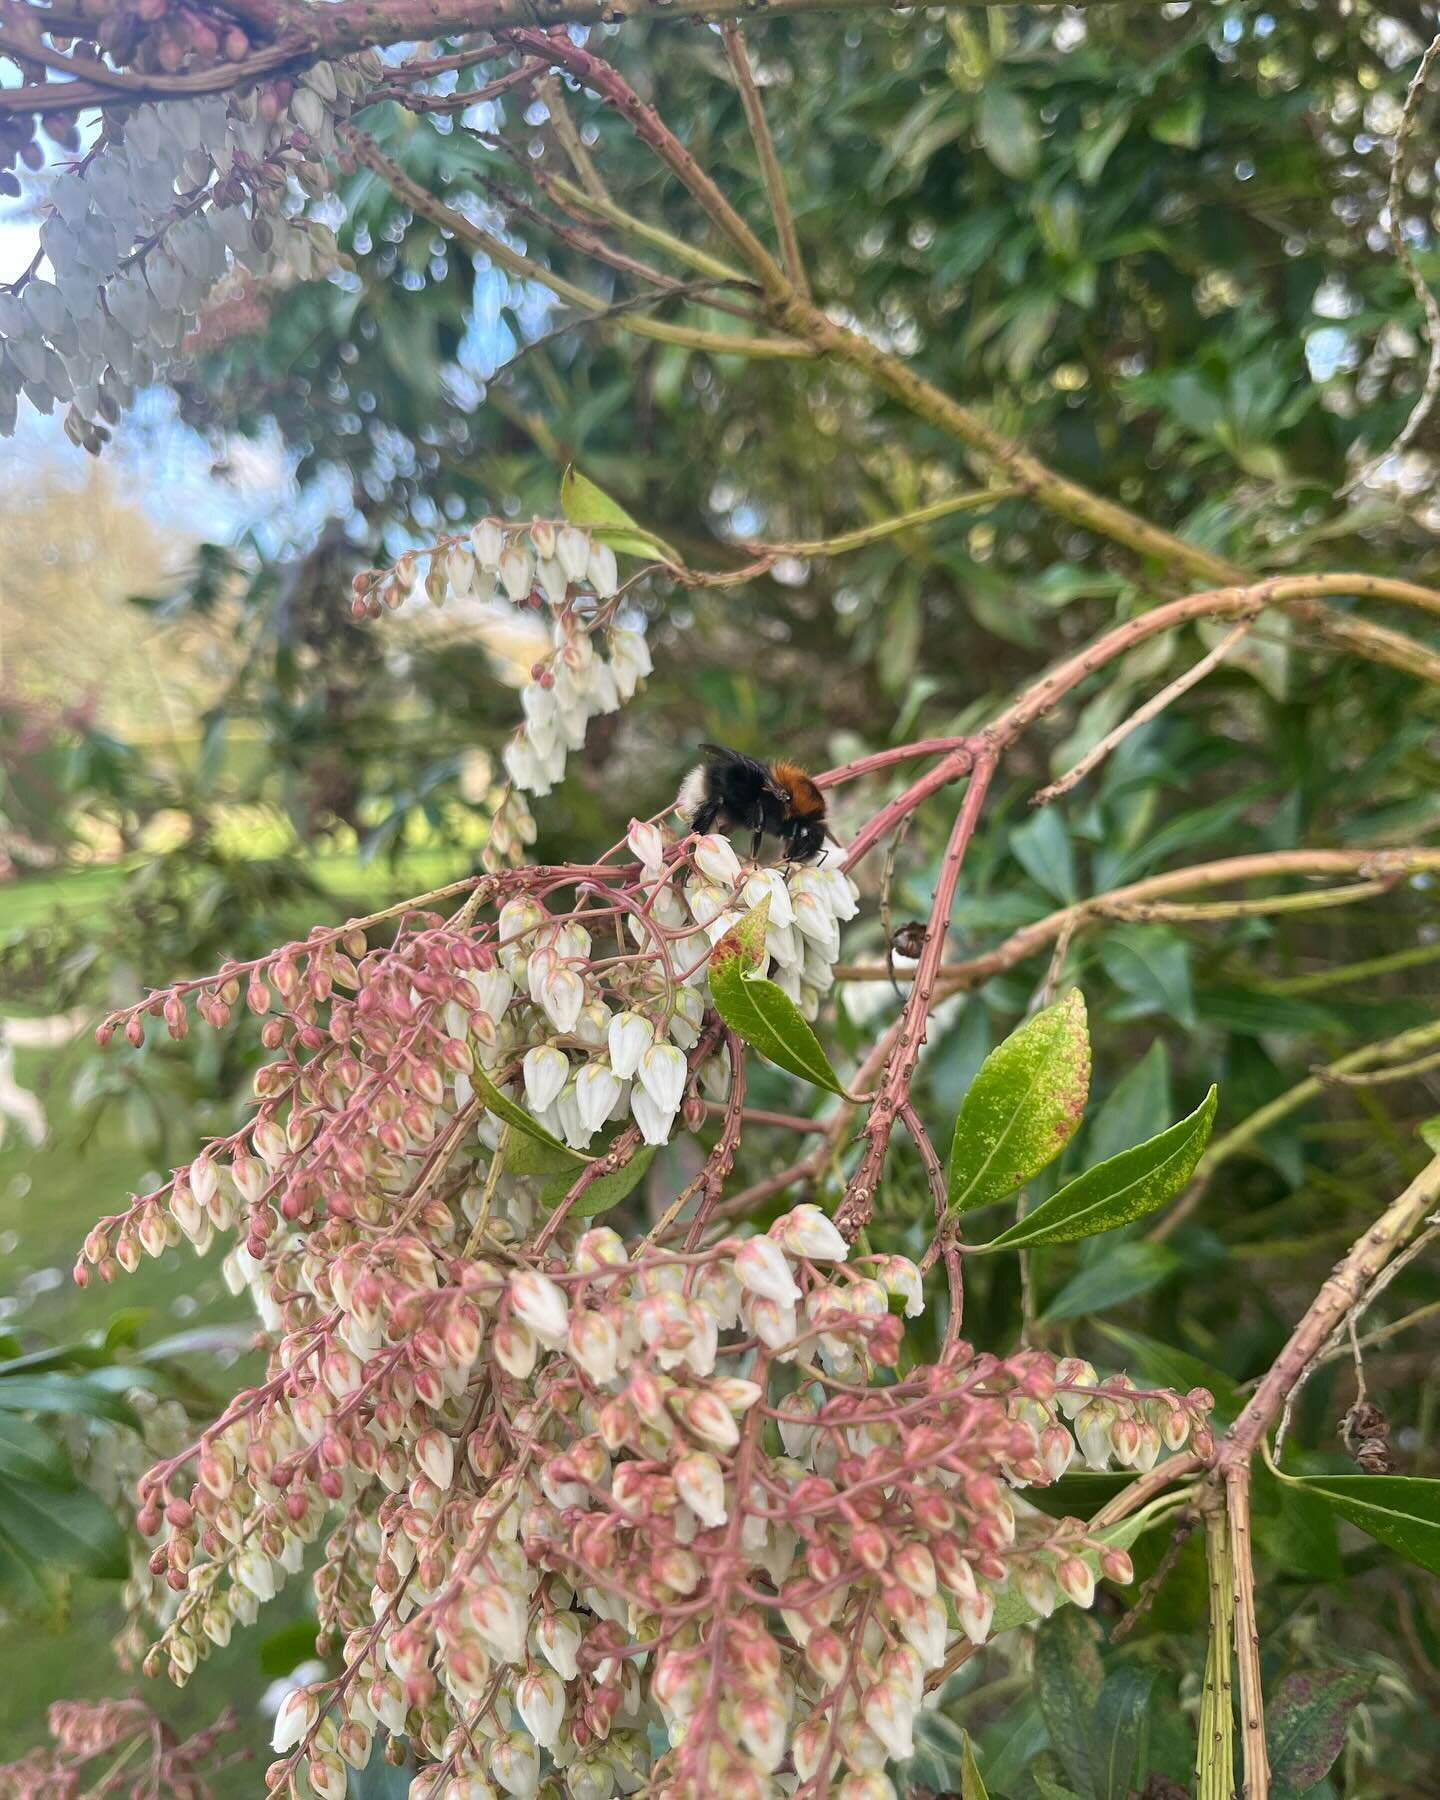 A sweet bumble bee enjoying one of our several Enkianthus campanulatus - such an unassuming but truly stunning shrub that comes into its own each spring with its creamy bell shaped flowers. Part of the Ericaceae or heather family, it is very at home 